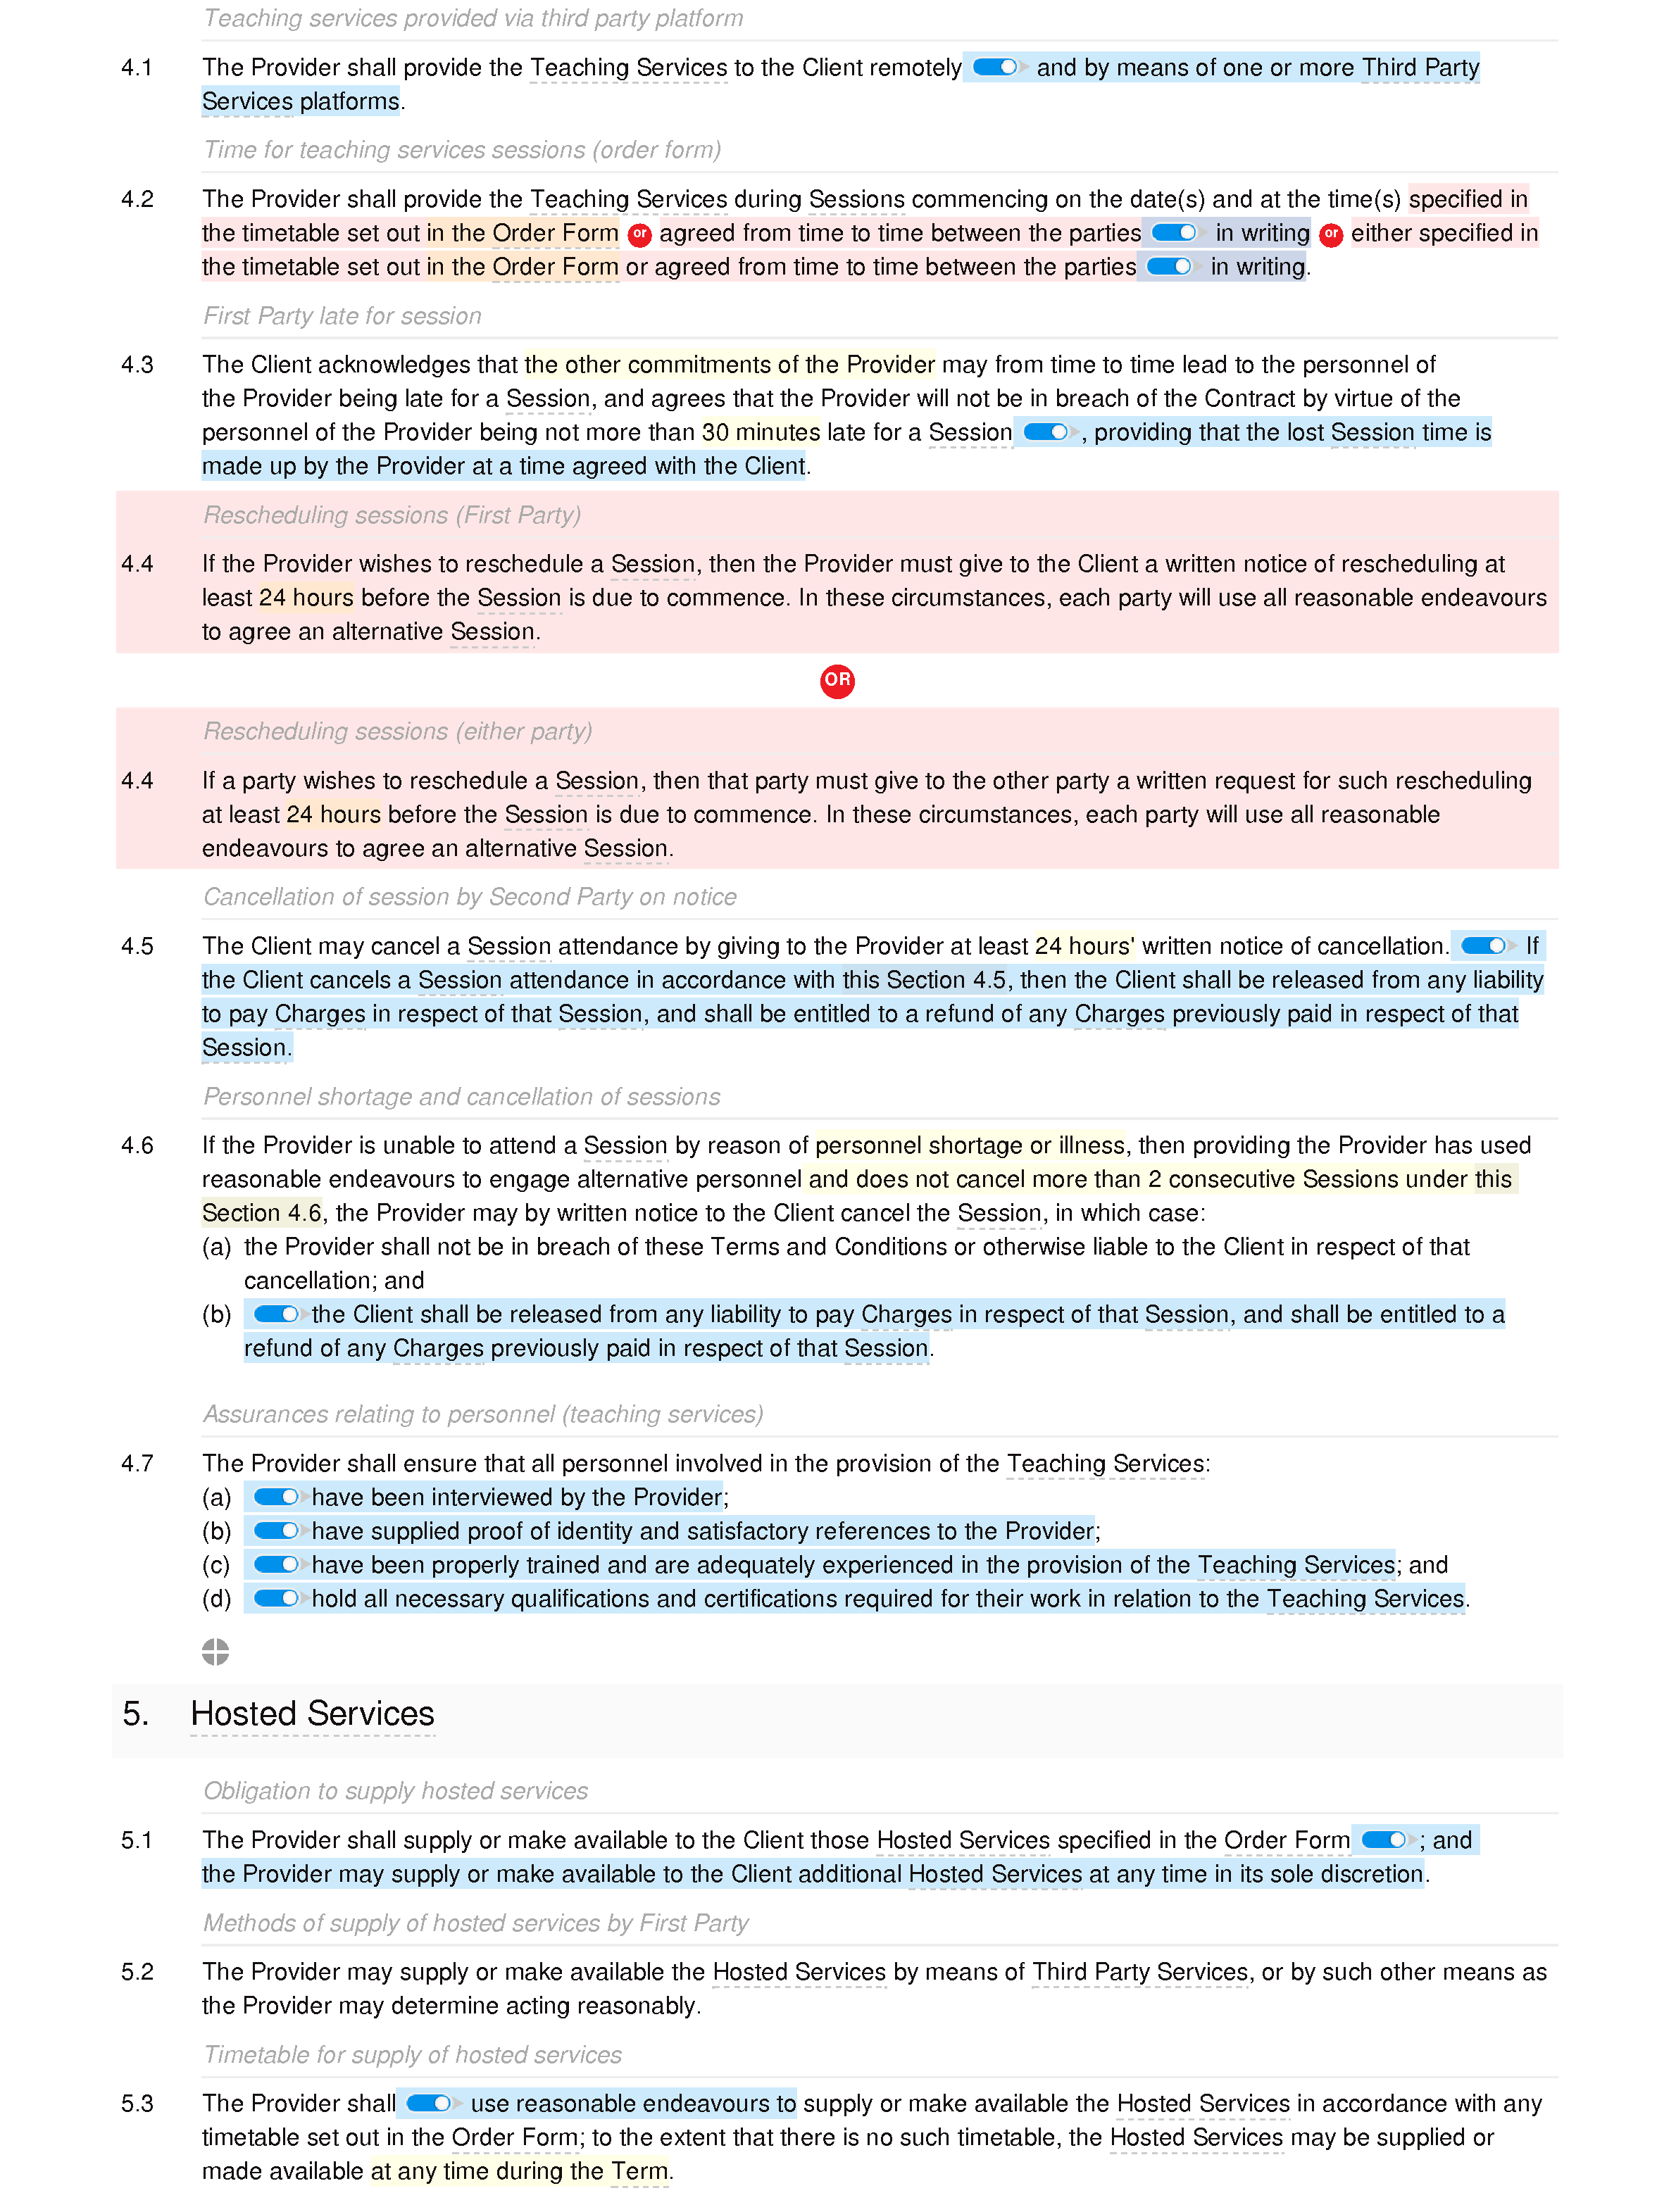 Online education and training terms and conditions (B2C) document editor preview